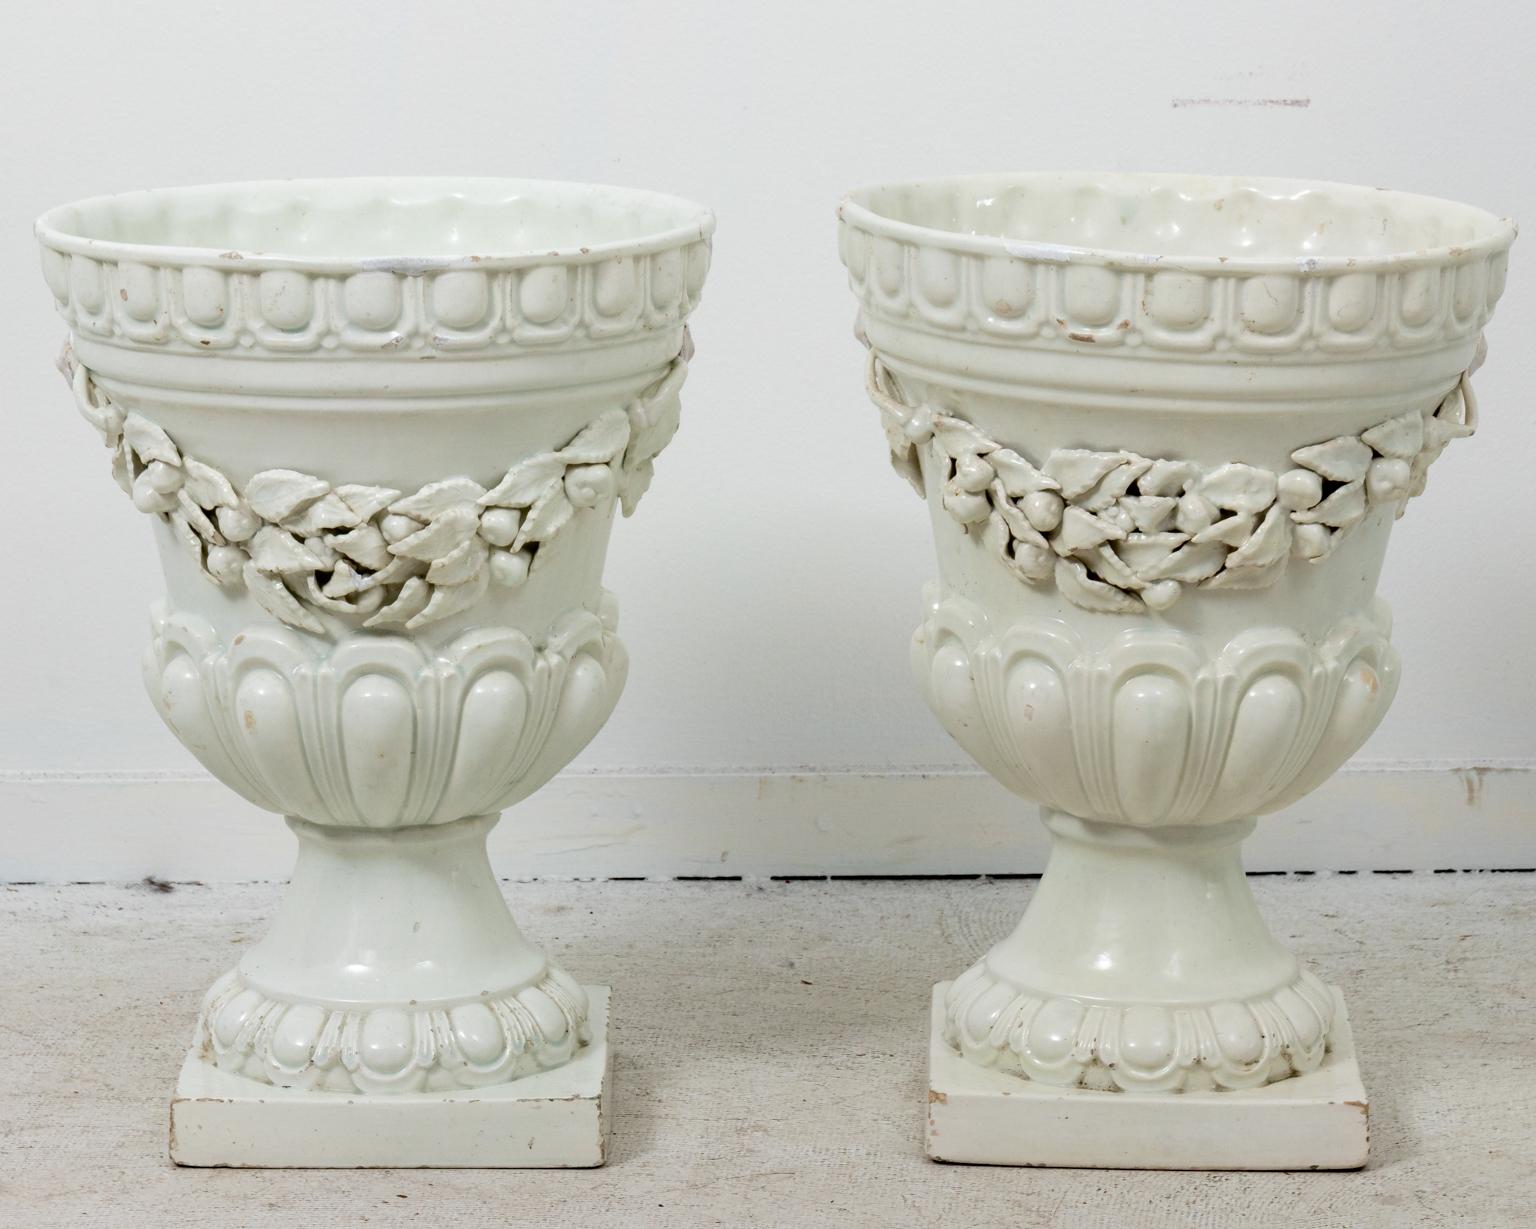 Neoclassical Pair of White Neoclassiclal Style Urns